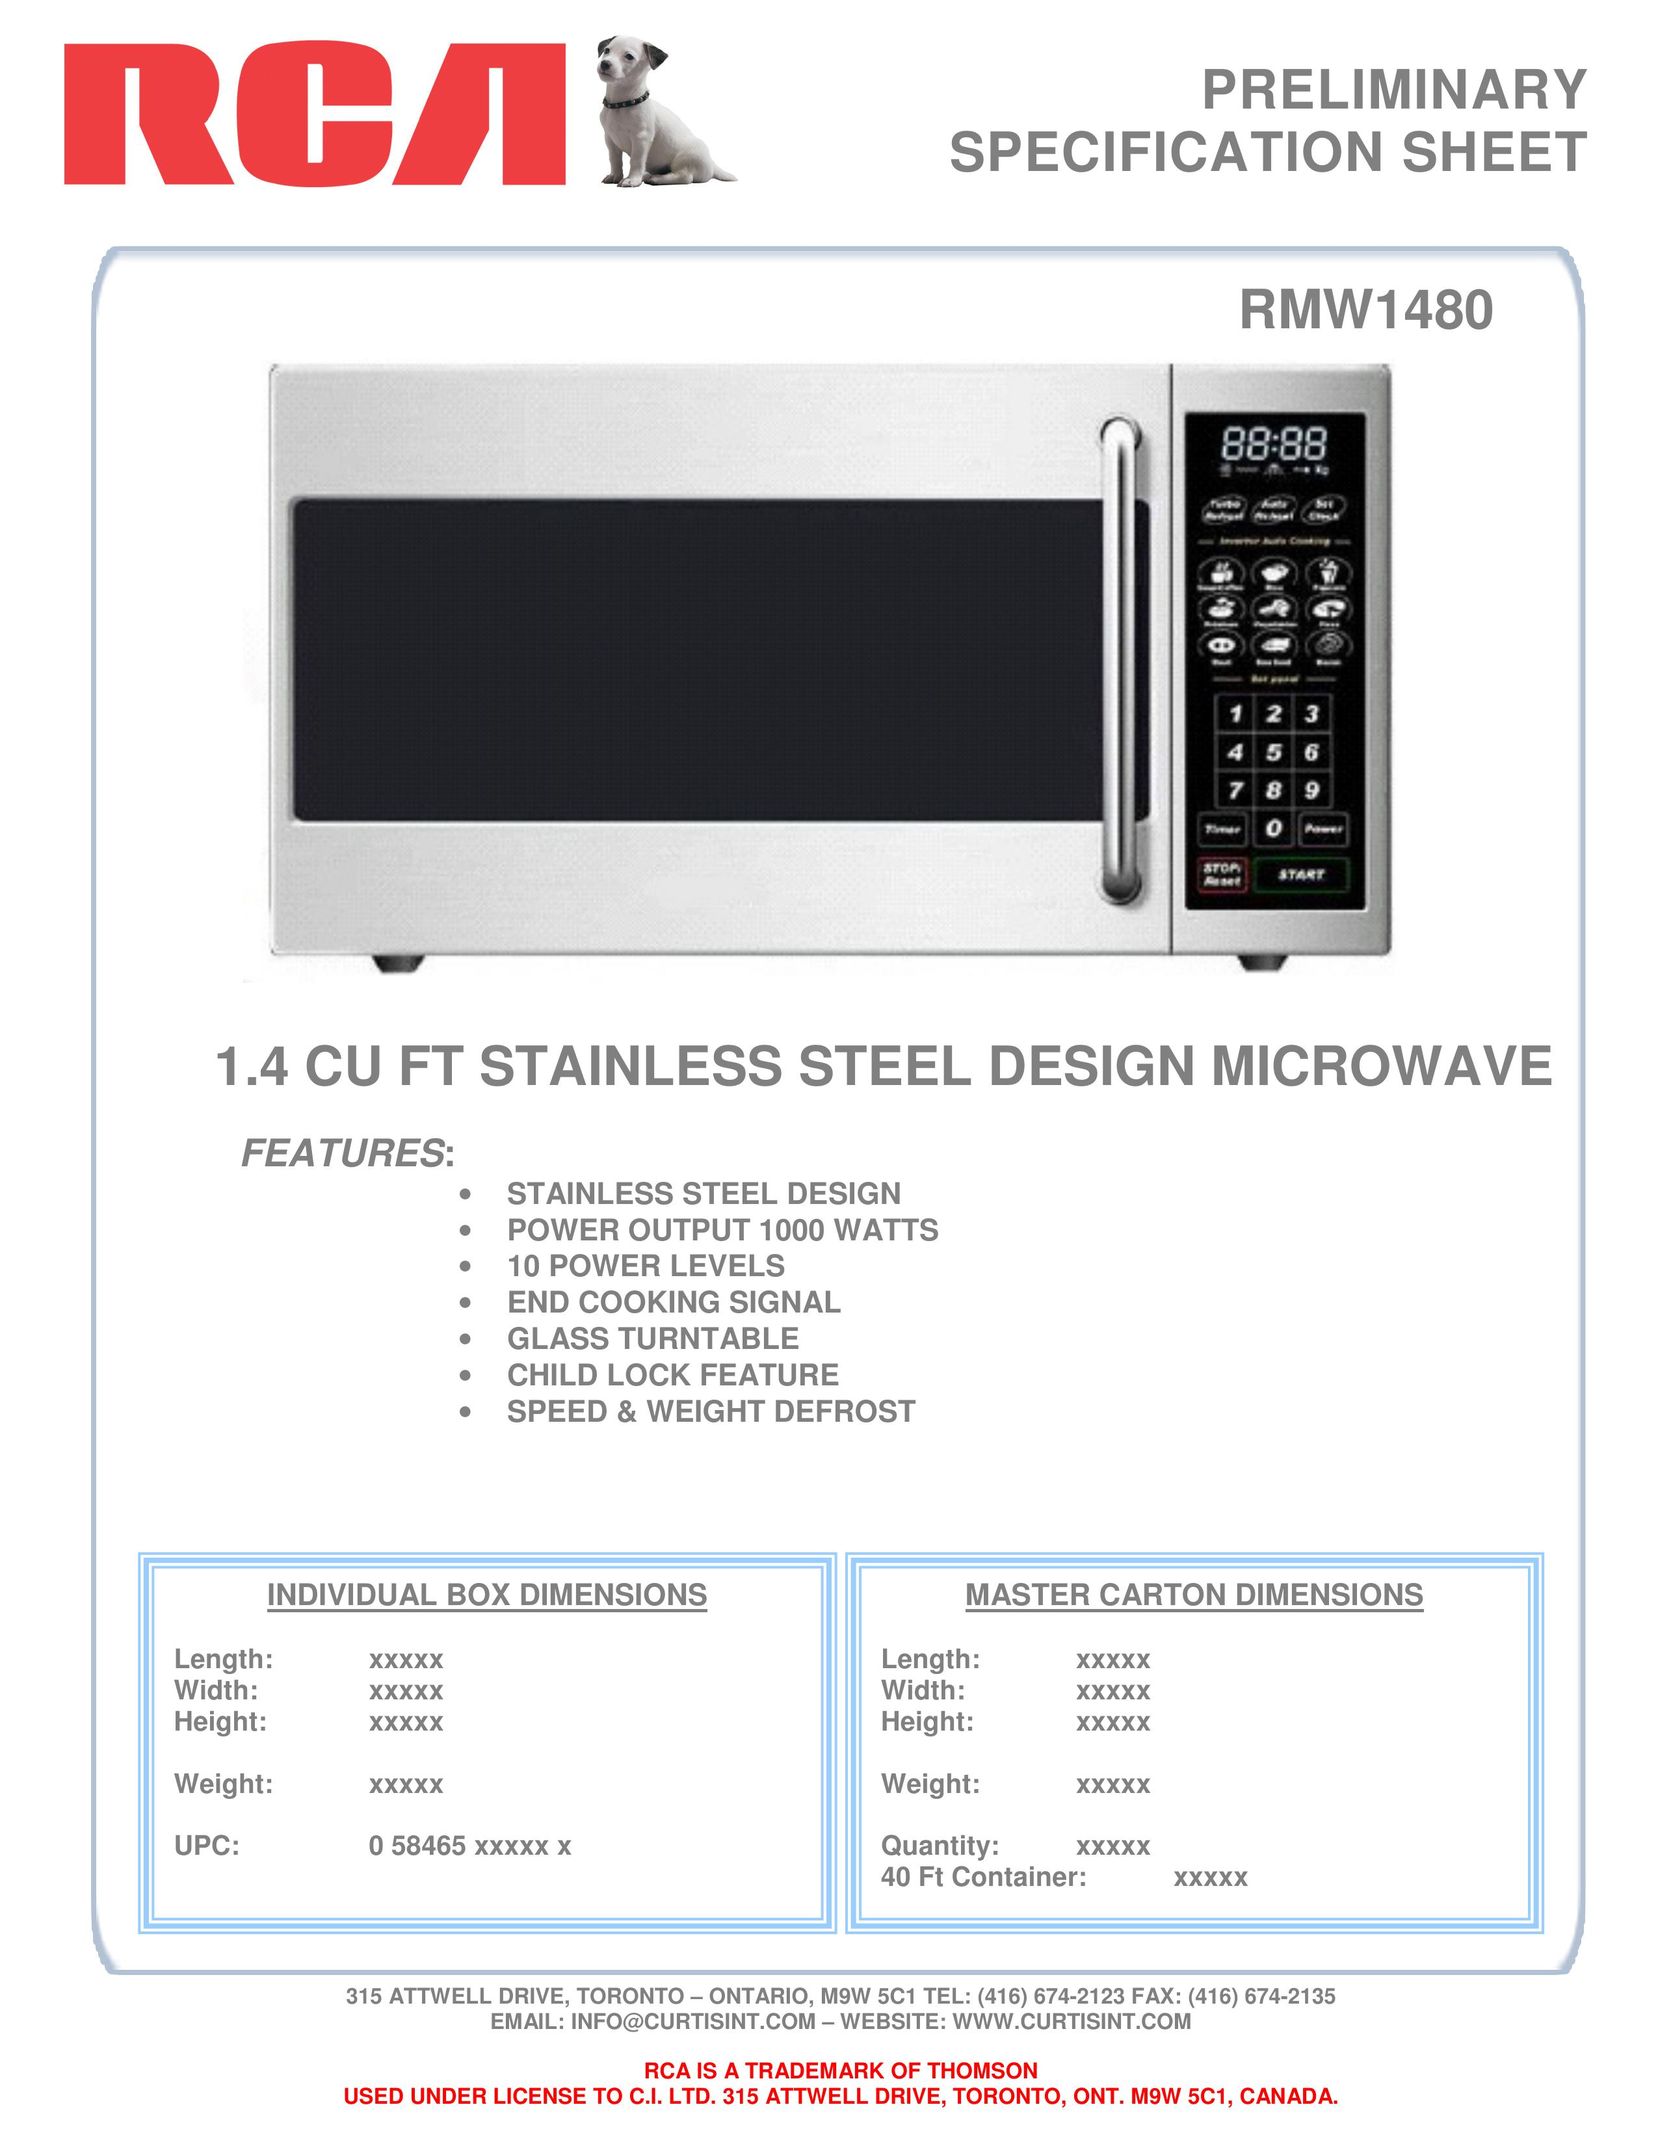 Curtis RMW1480 Microwave Oven User Manual